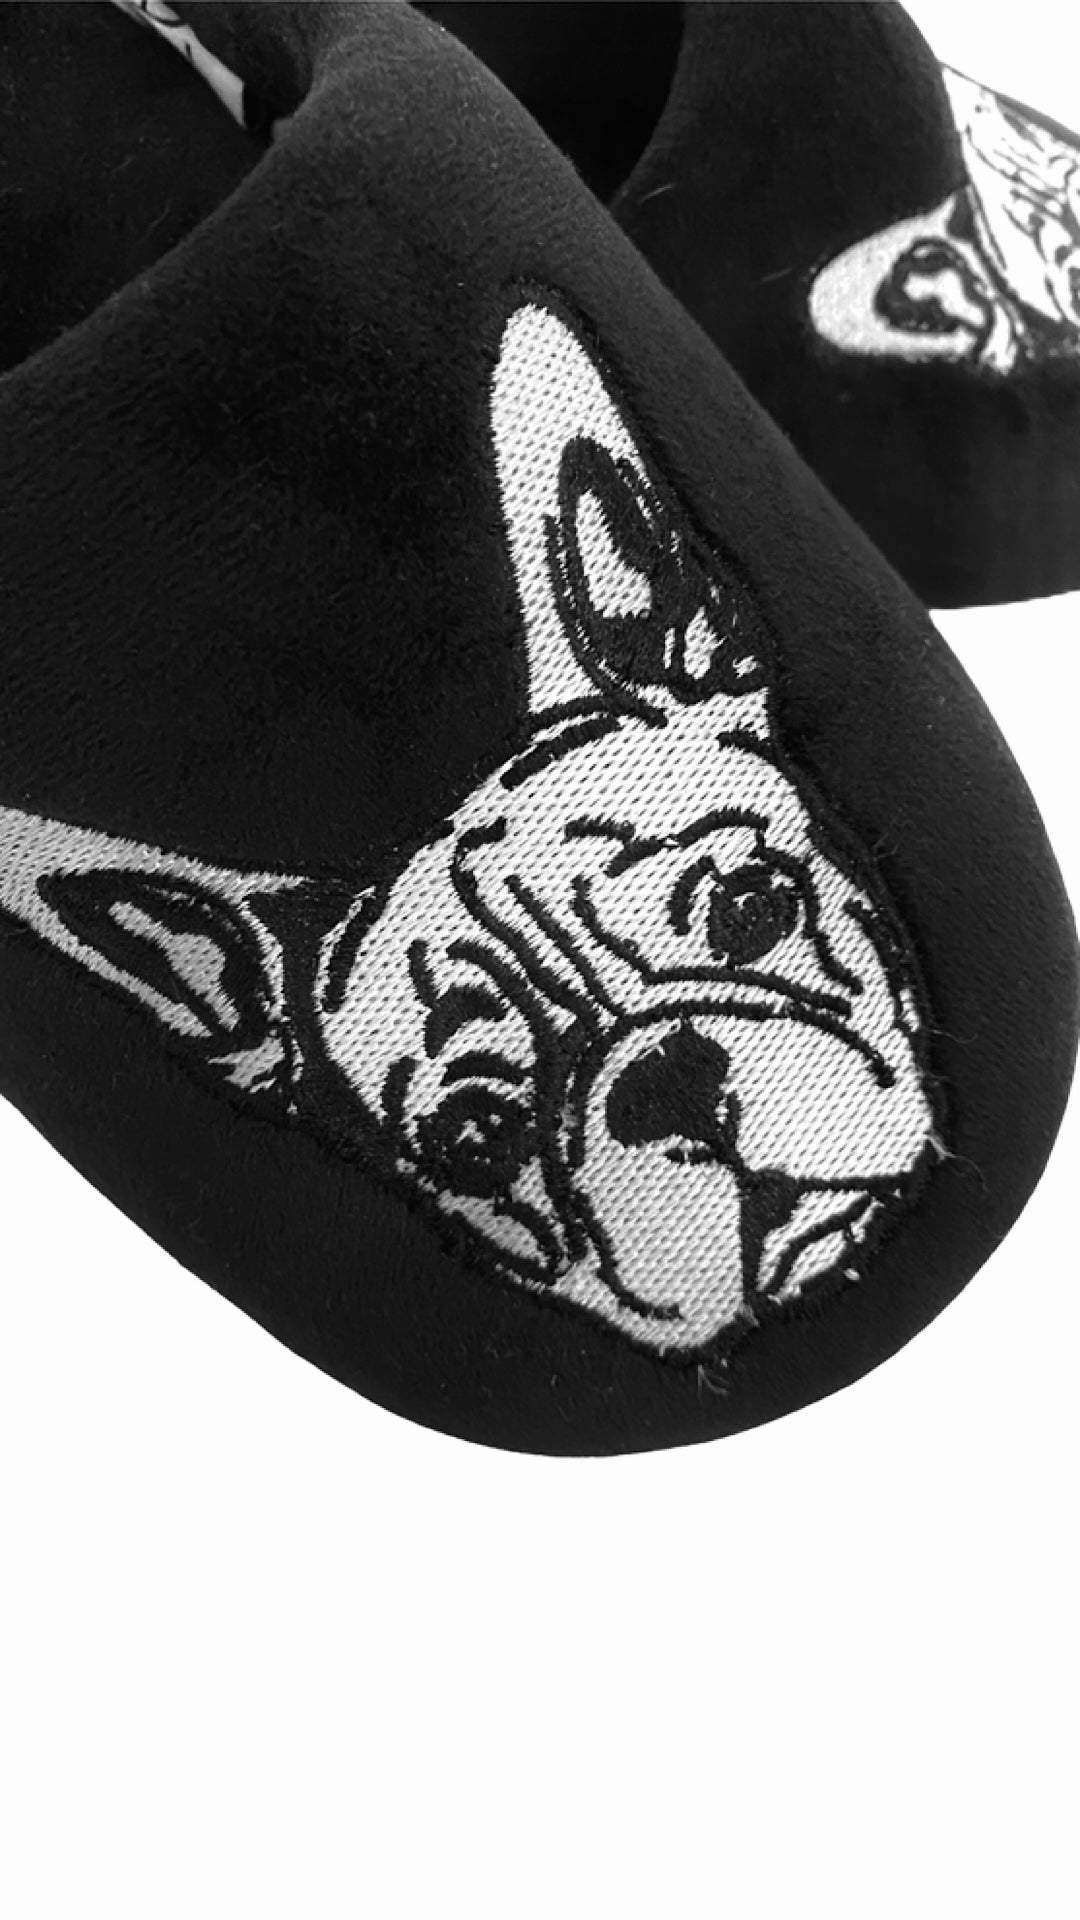 Details more than 126 bulldog slippers